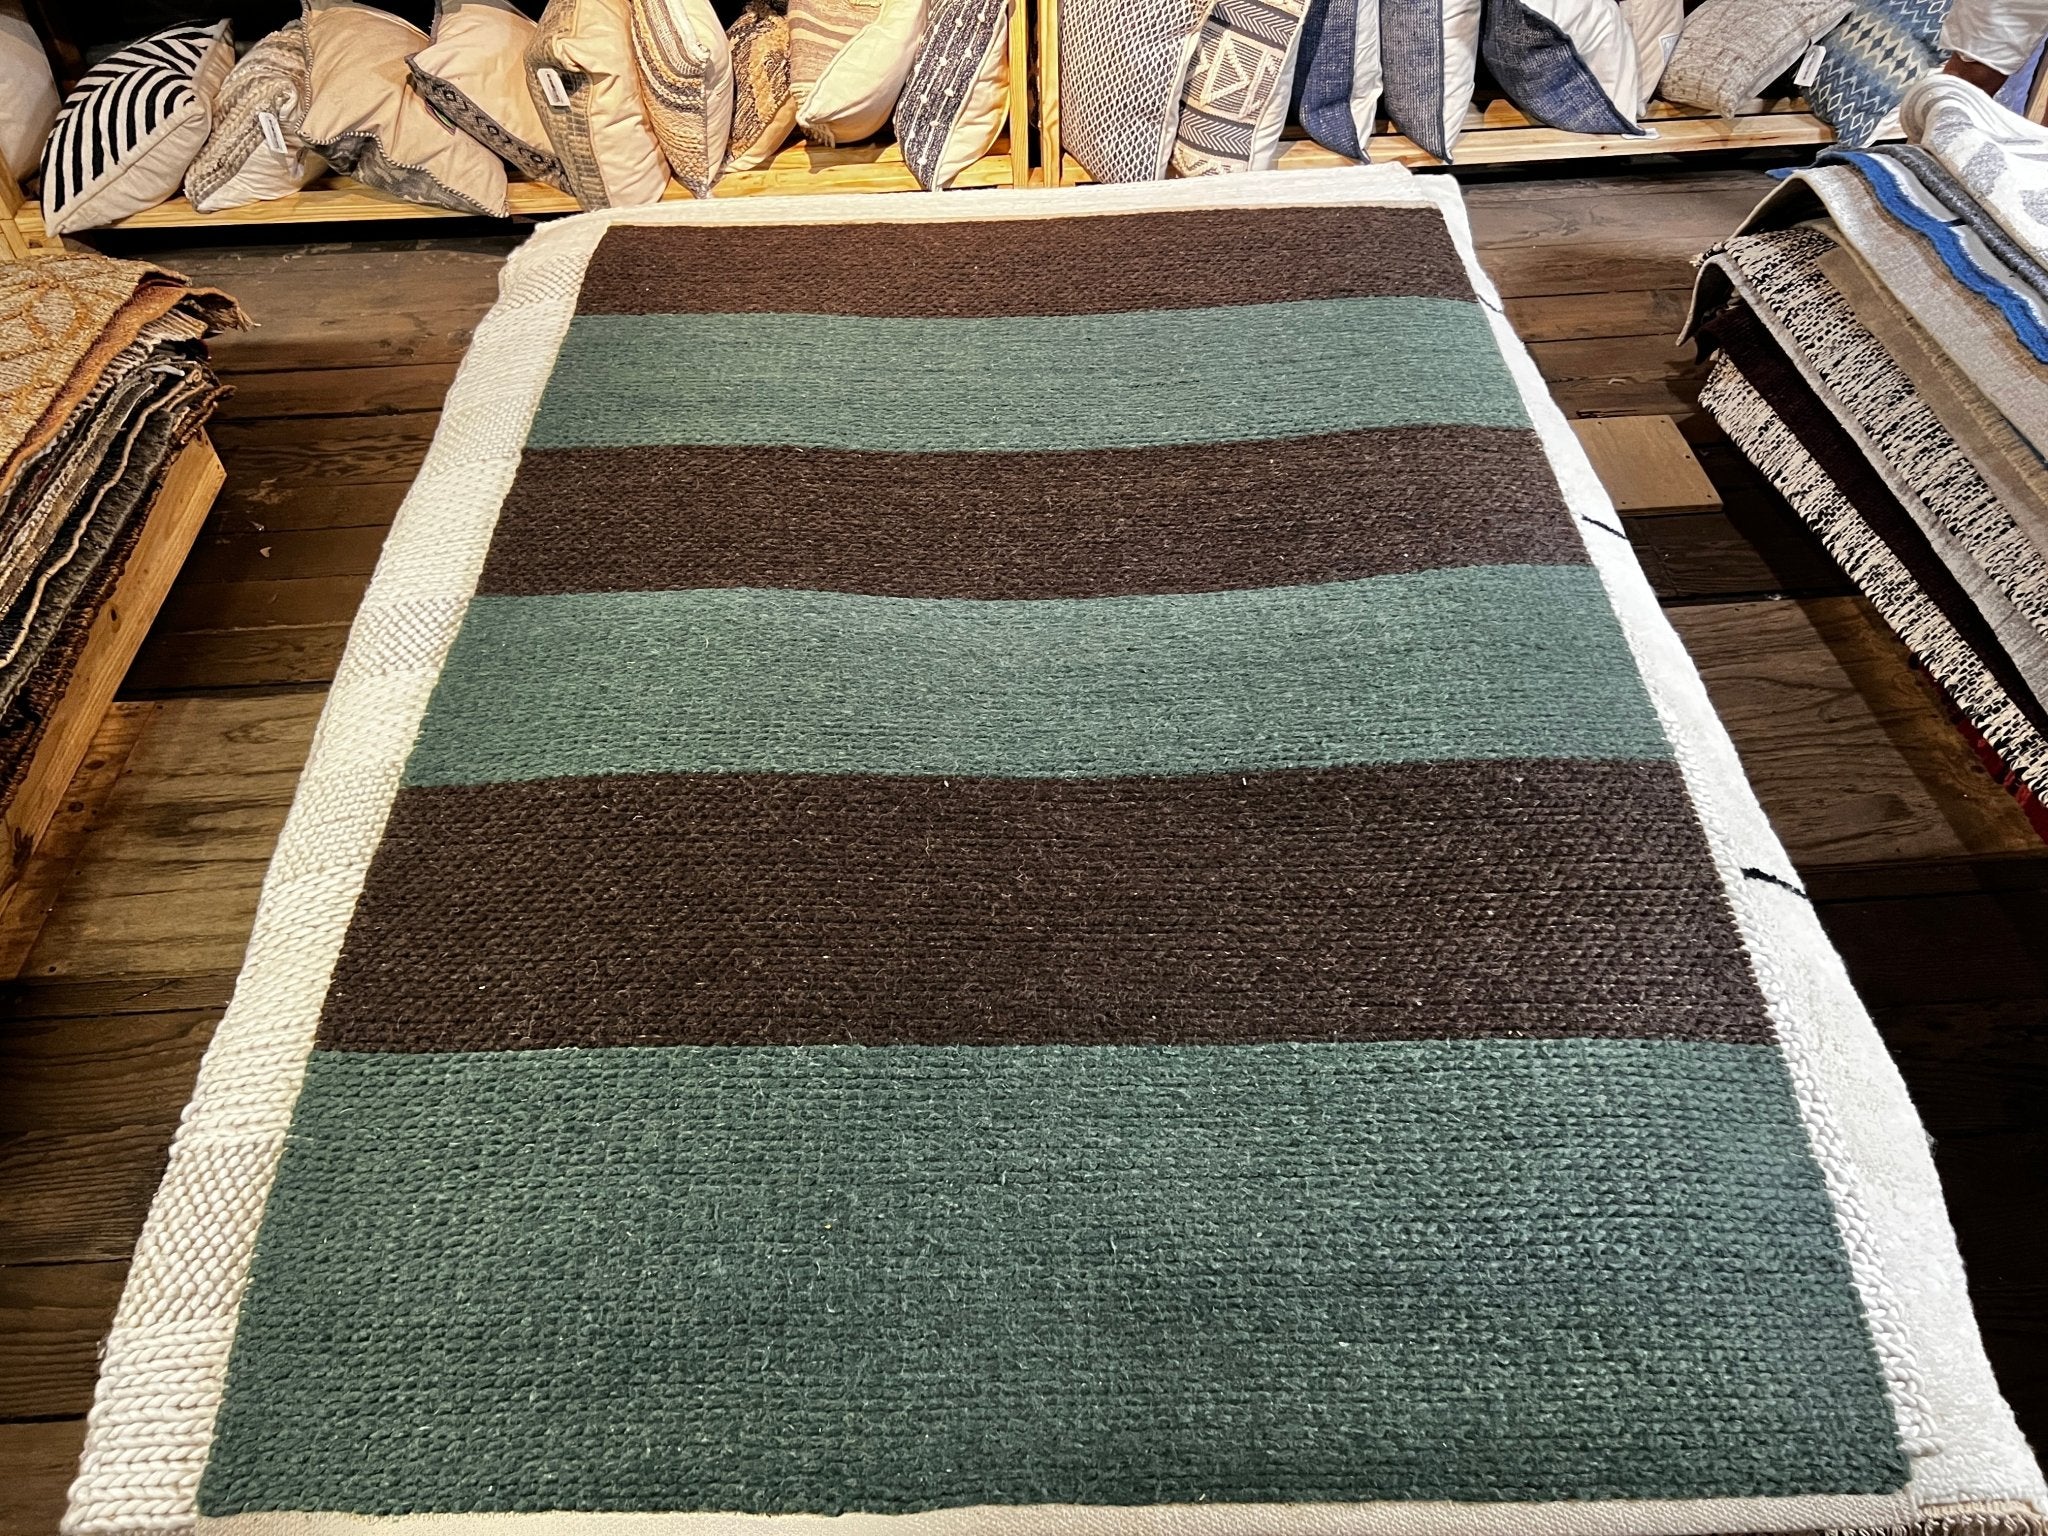 Dr. Evil 4.6x7 Brown and Green Striped Handwoven Durrie Rug | Banana Manor Rug Company